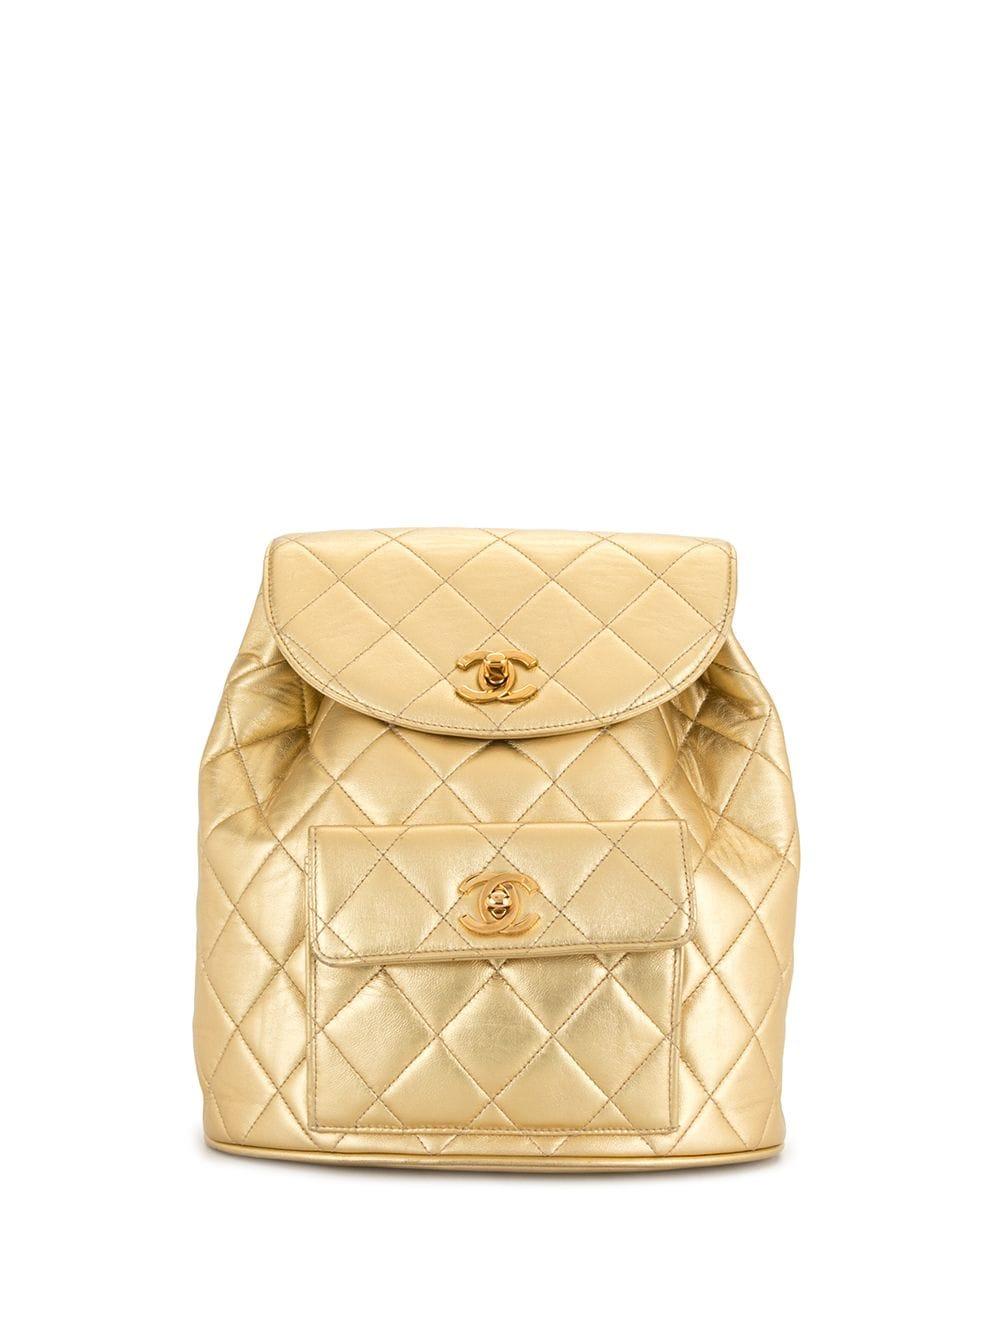 Chanel 1994 Vintage Rare Metallic Gold Quilted Lambskin Duma CC Logo Backpack In Good Condition For Sale In Miami, FL